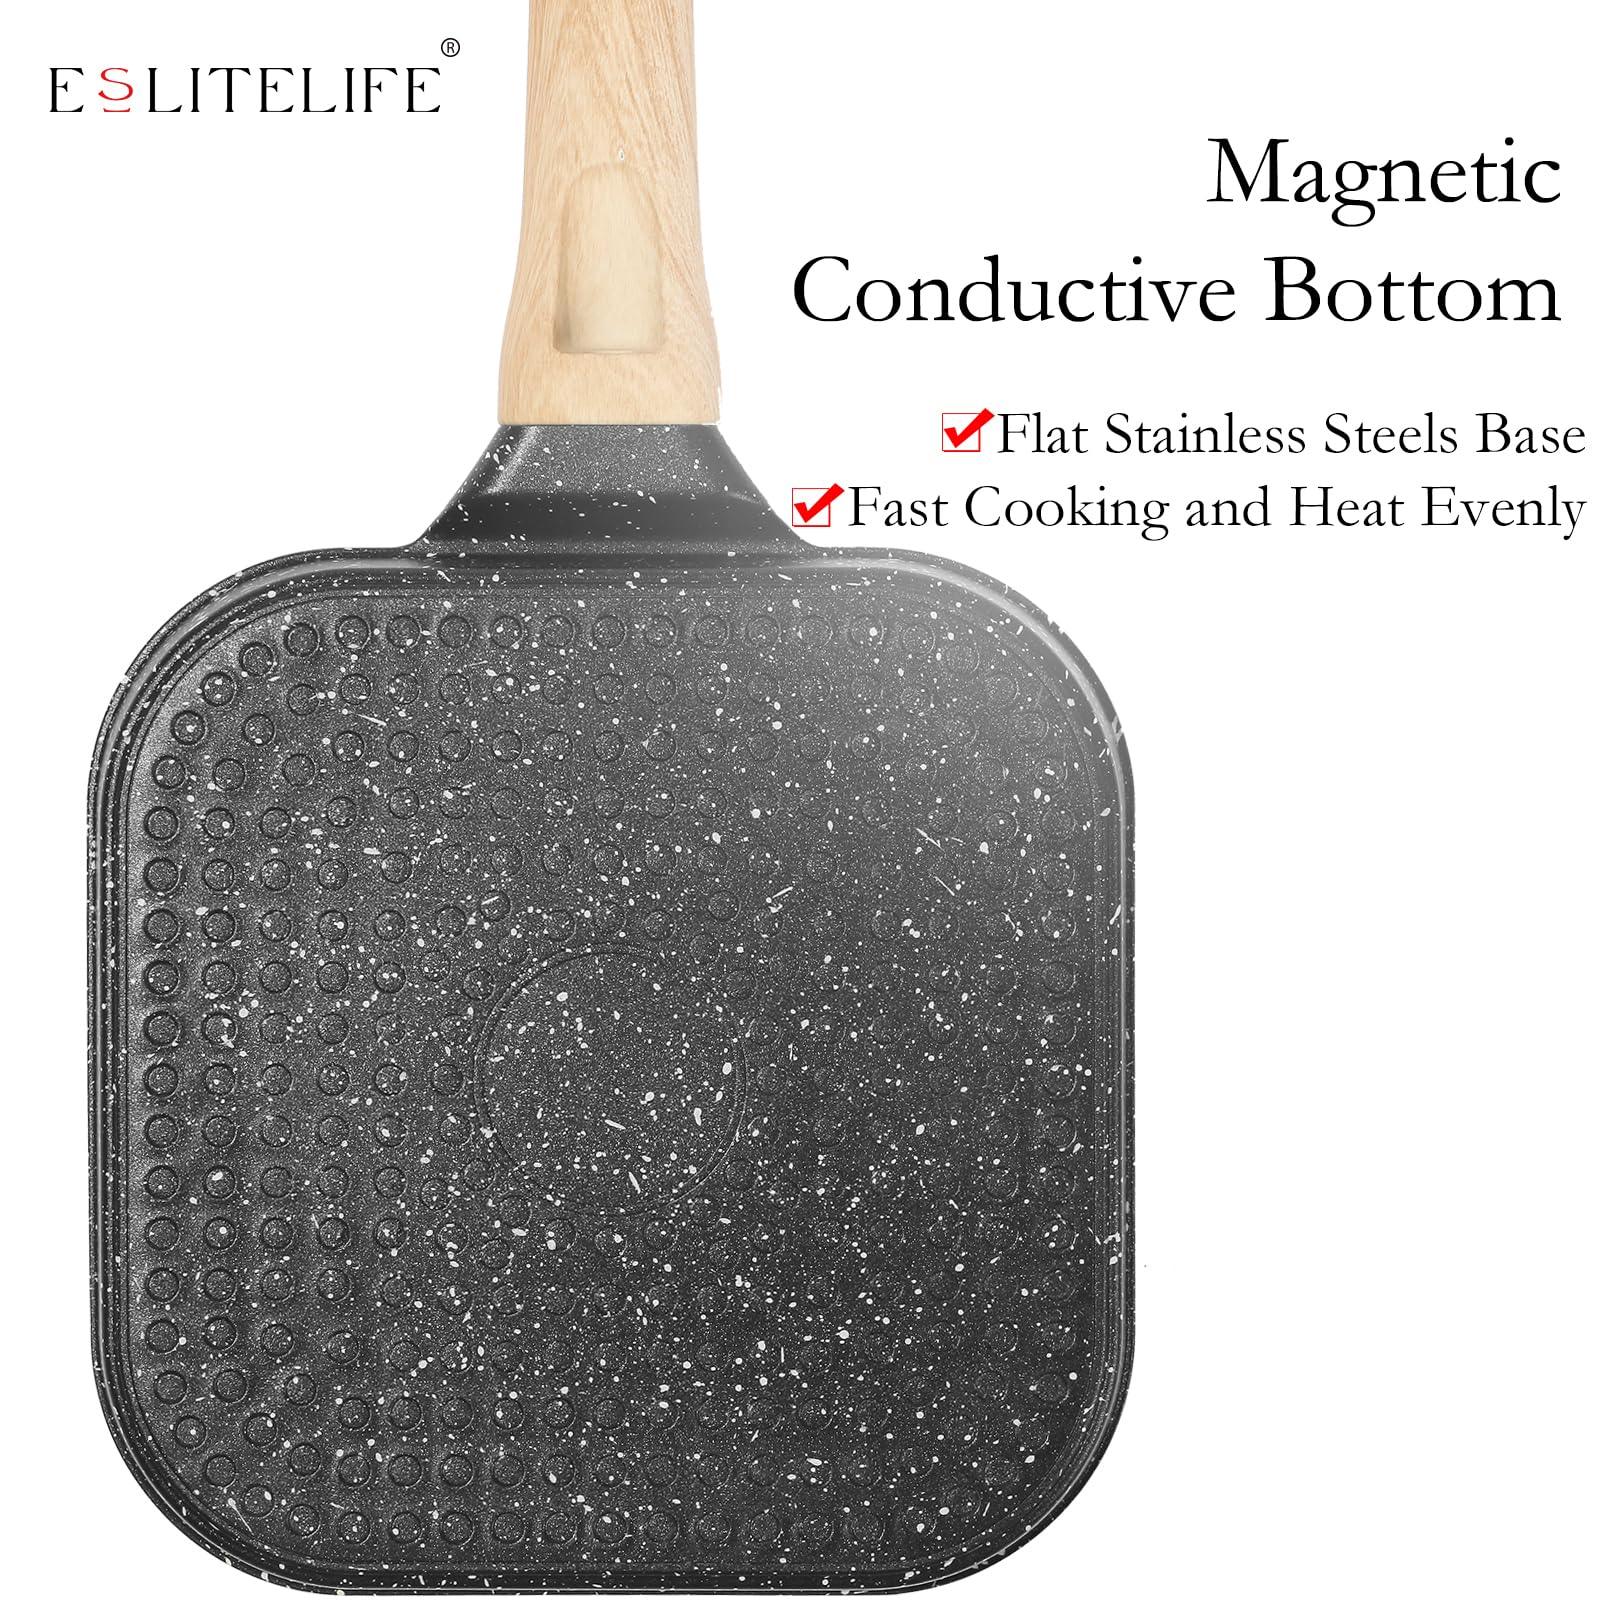 ESLITE LIFE Nonstick Grill Pan for Stove Tops, Versatile Square Small Grill Skillet Steak Pan for Indoor Cooking & Outdoor Grilling, PFOA Free, Black-7 Inch - CookCave